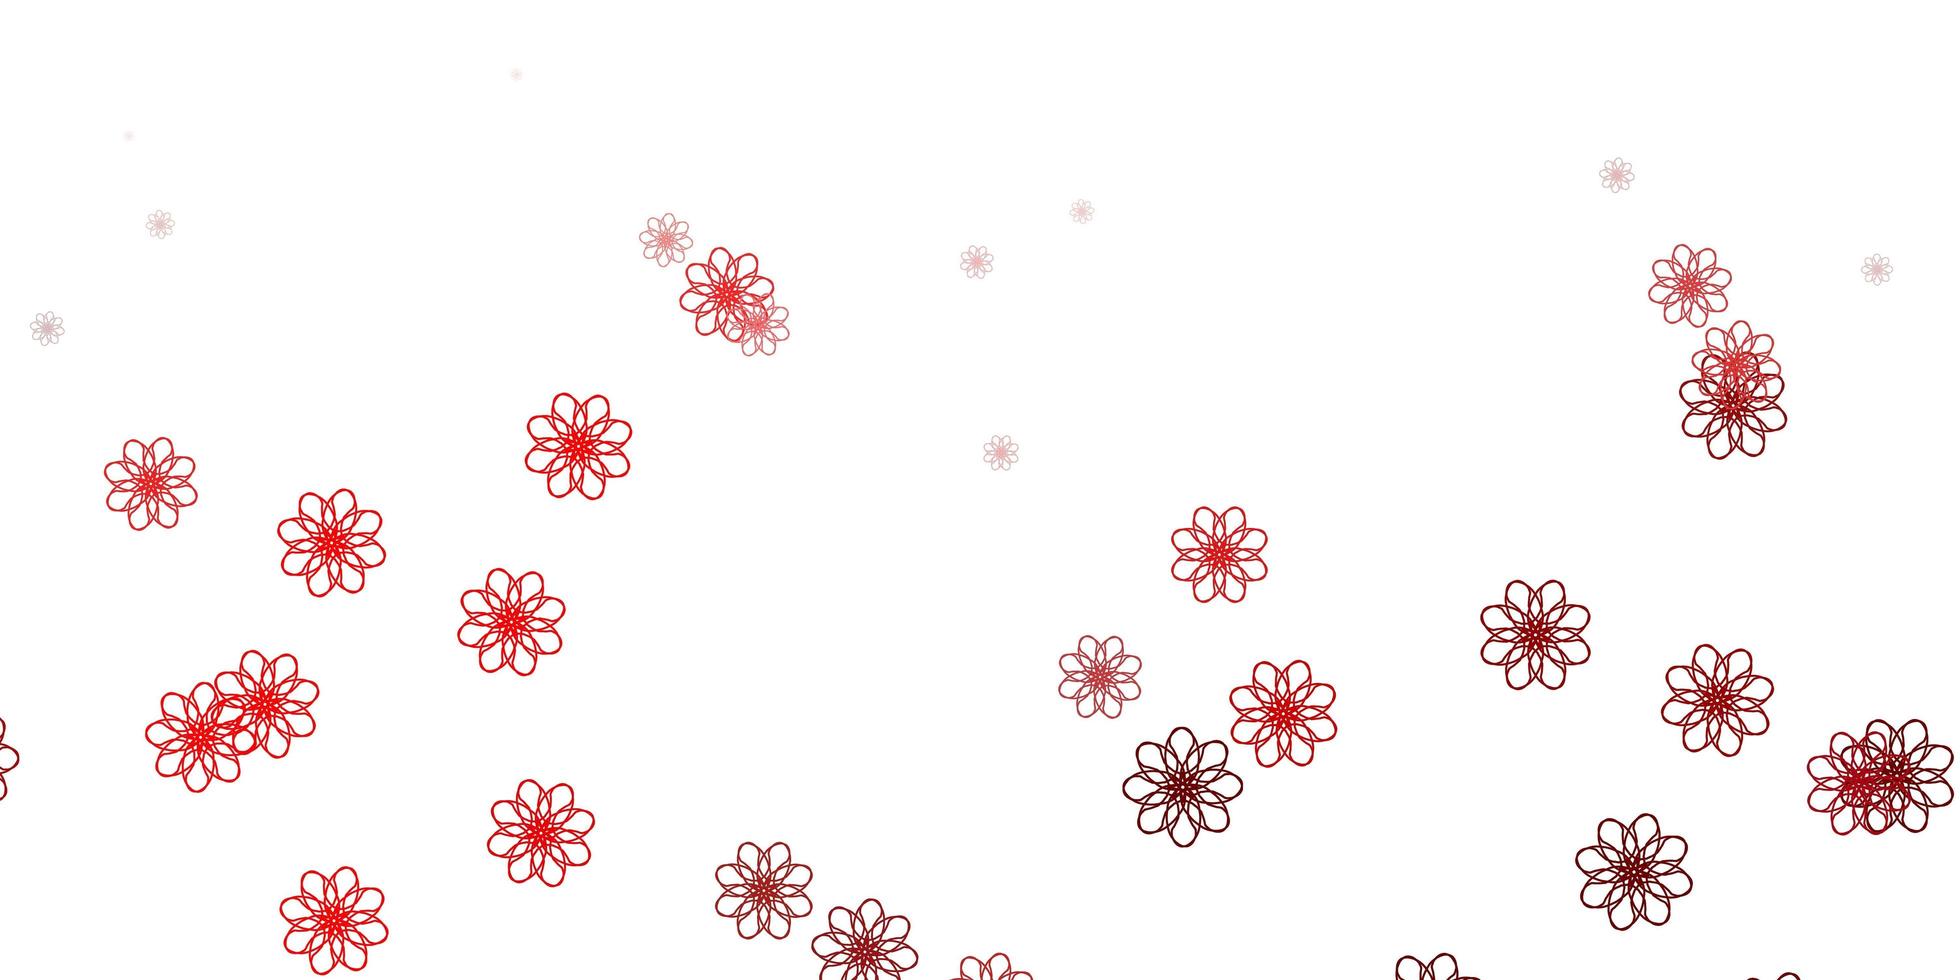 Light Red vector doodle texture with flowers.